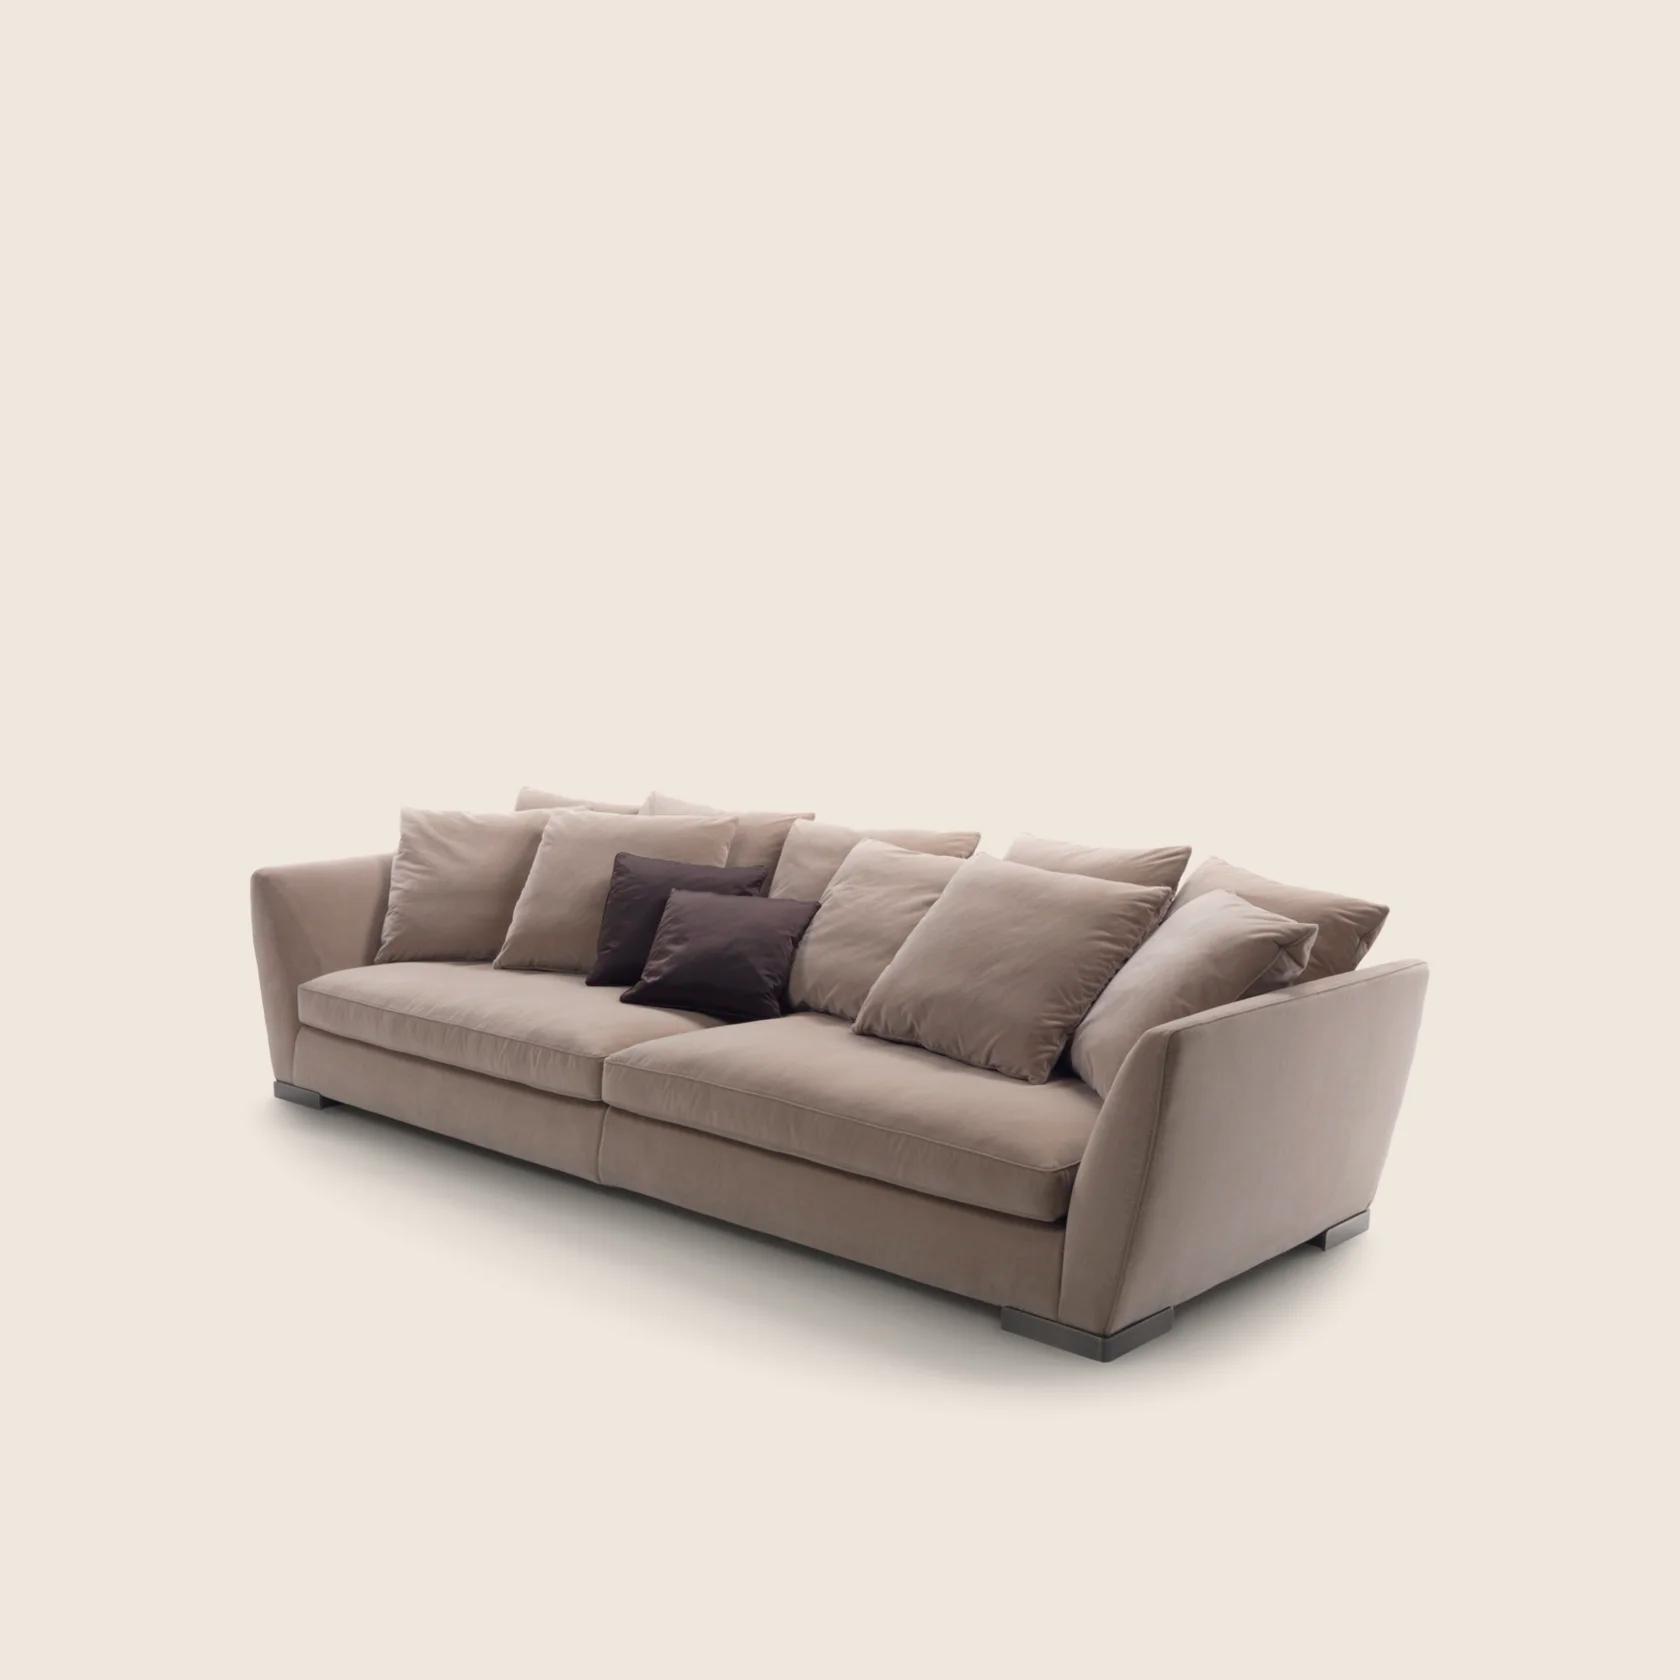 01M703_GINEVRA_SECTIONAL_02.png